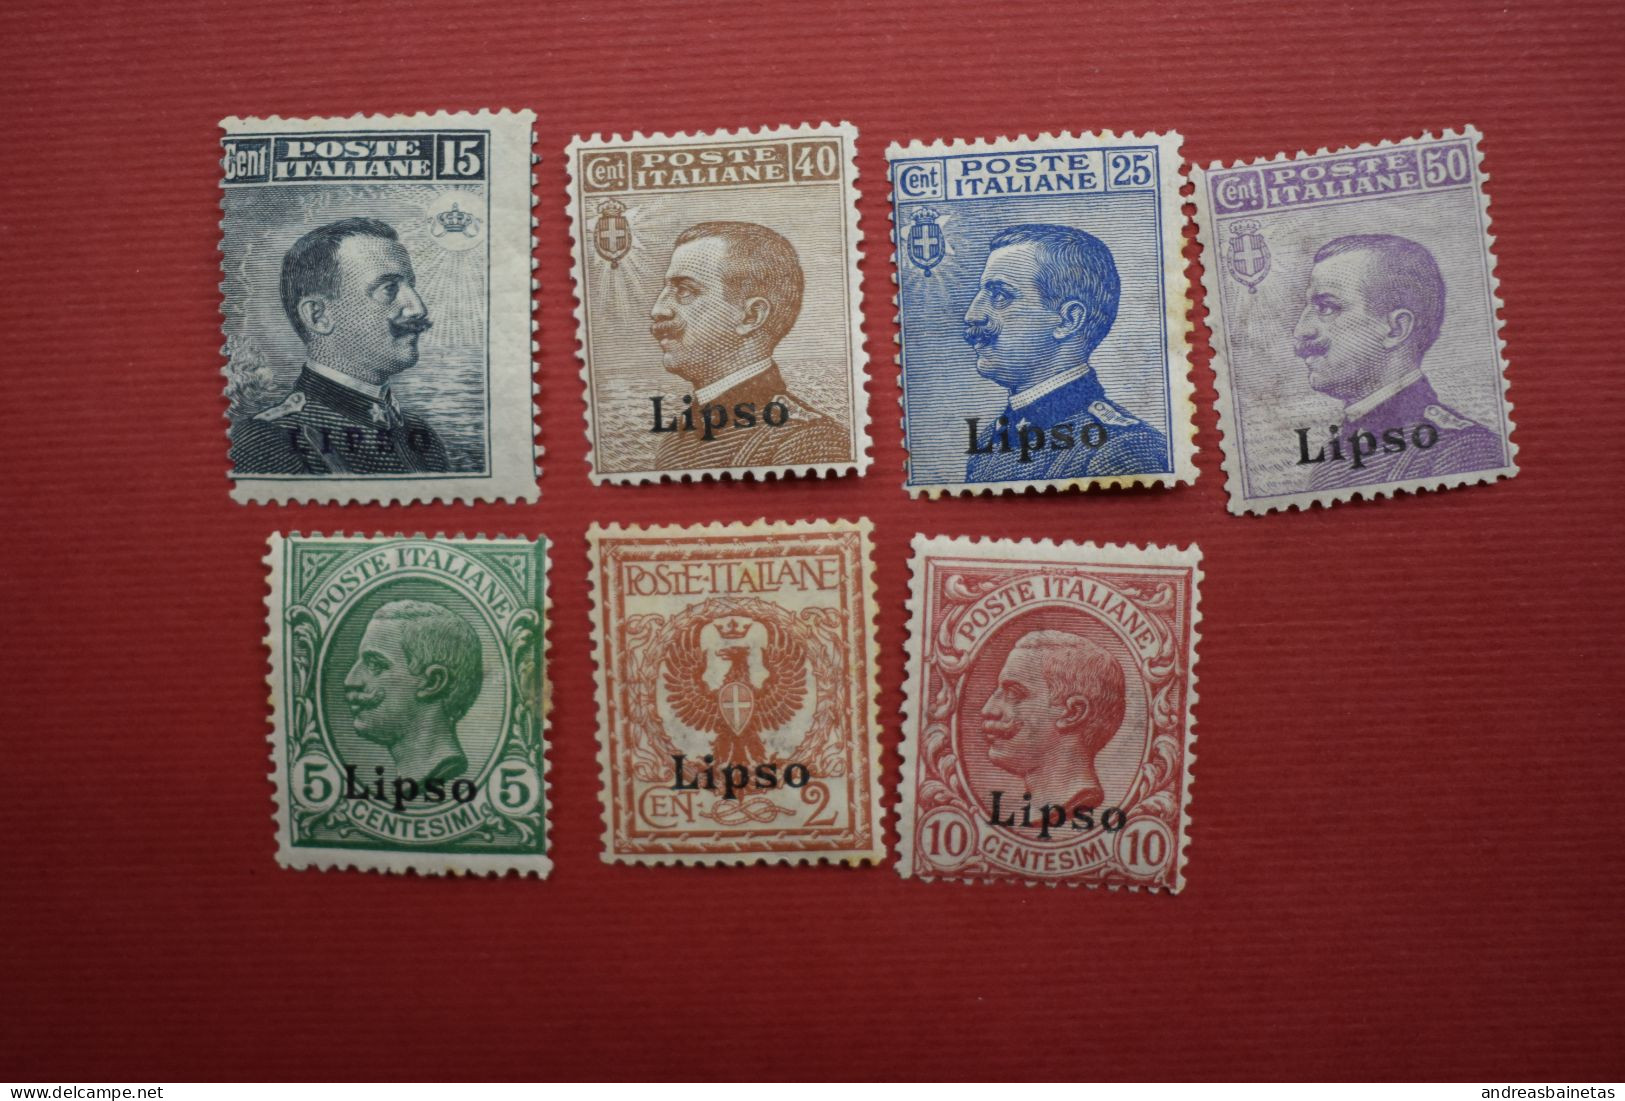 Stamps Greece ITALIAN OCCUPATION - ITALIAN POST 1912 "LIPSO" Ovpt, Complete Set Of 7 Values, M. (Hellas 3VII/9VII). - Dodecanese